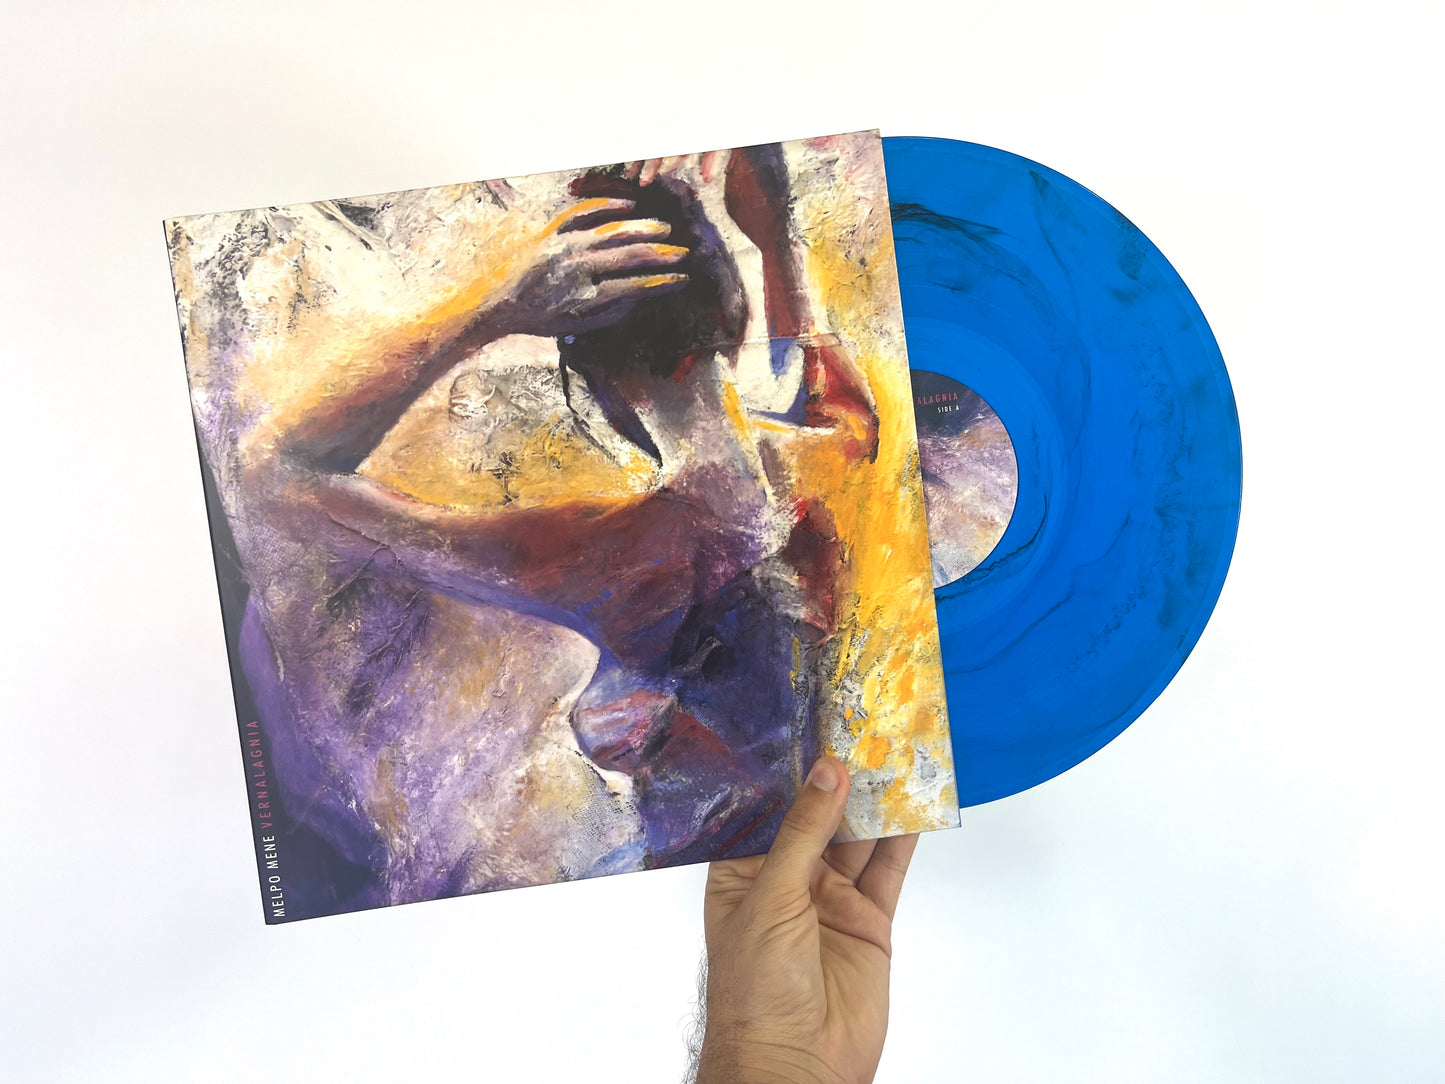 Muse Will Of The People Bone Colored Vinyl LP